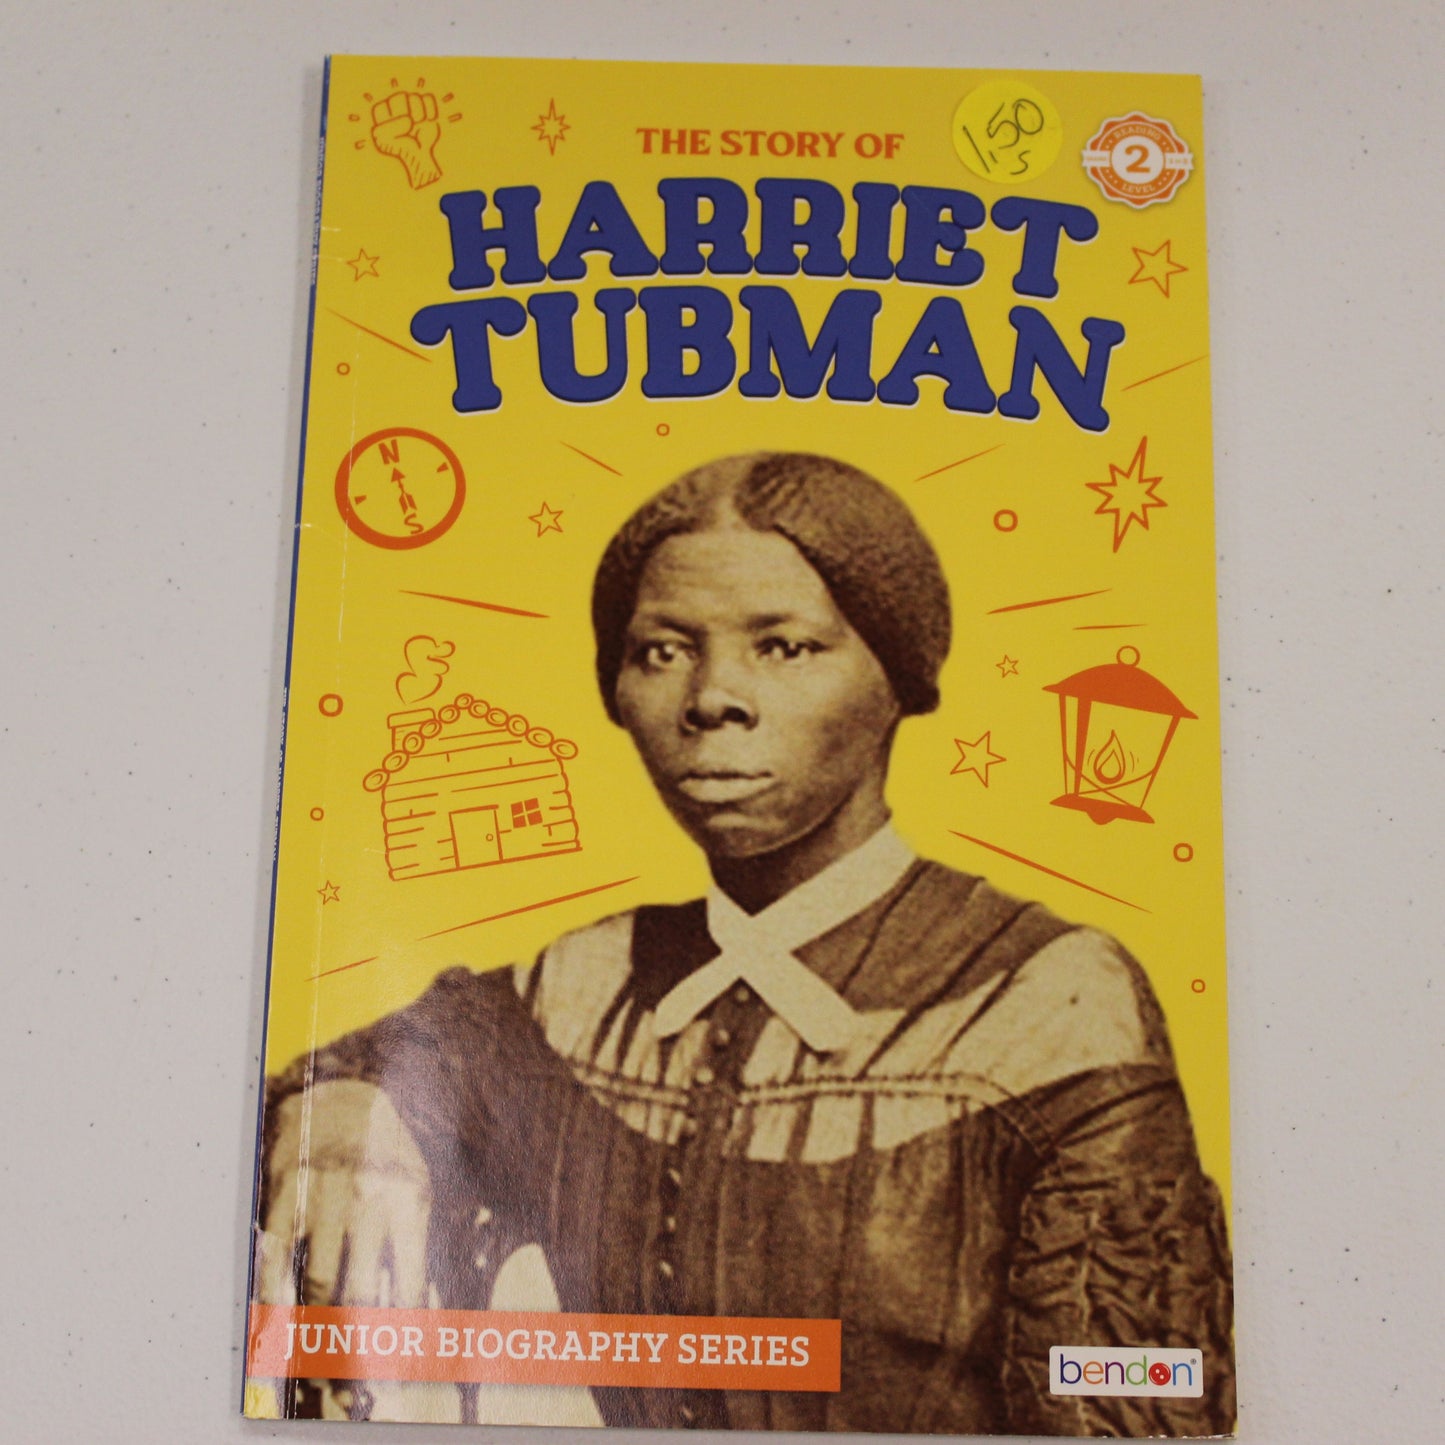 THE STORY OF HARRIET TUBMAN